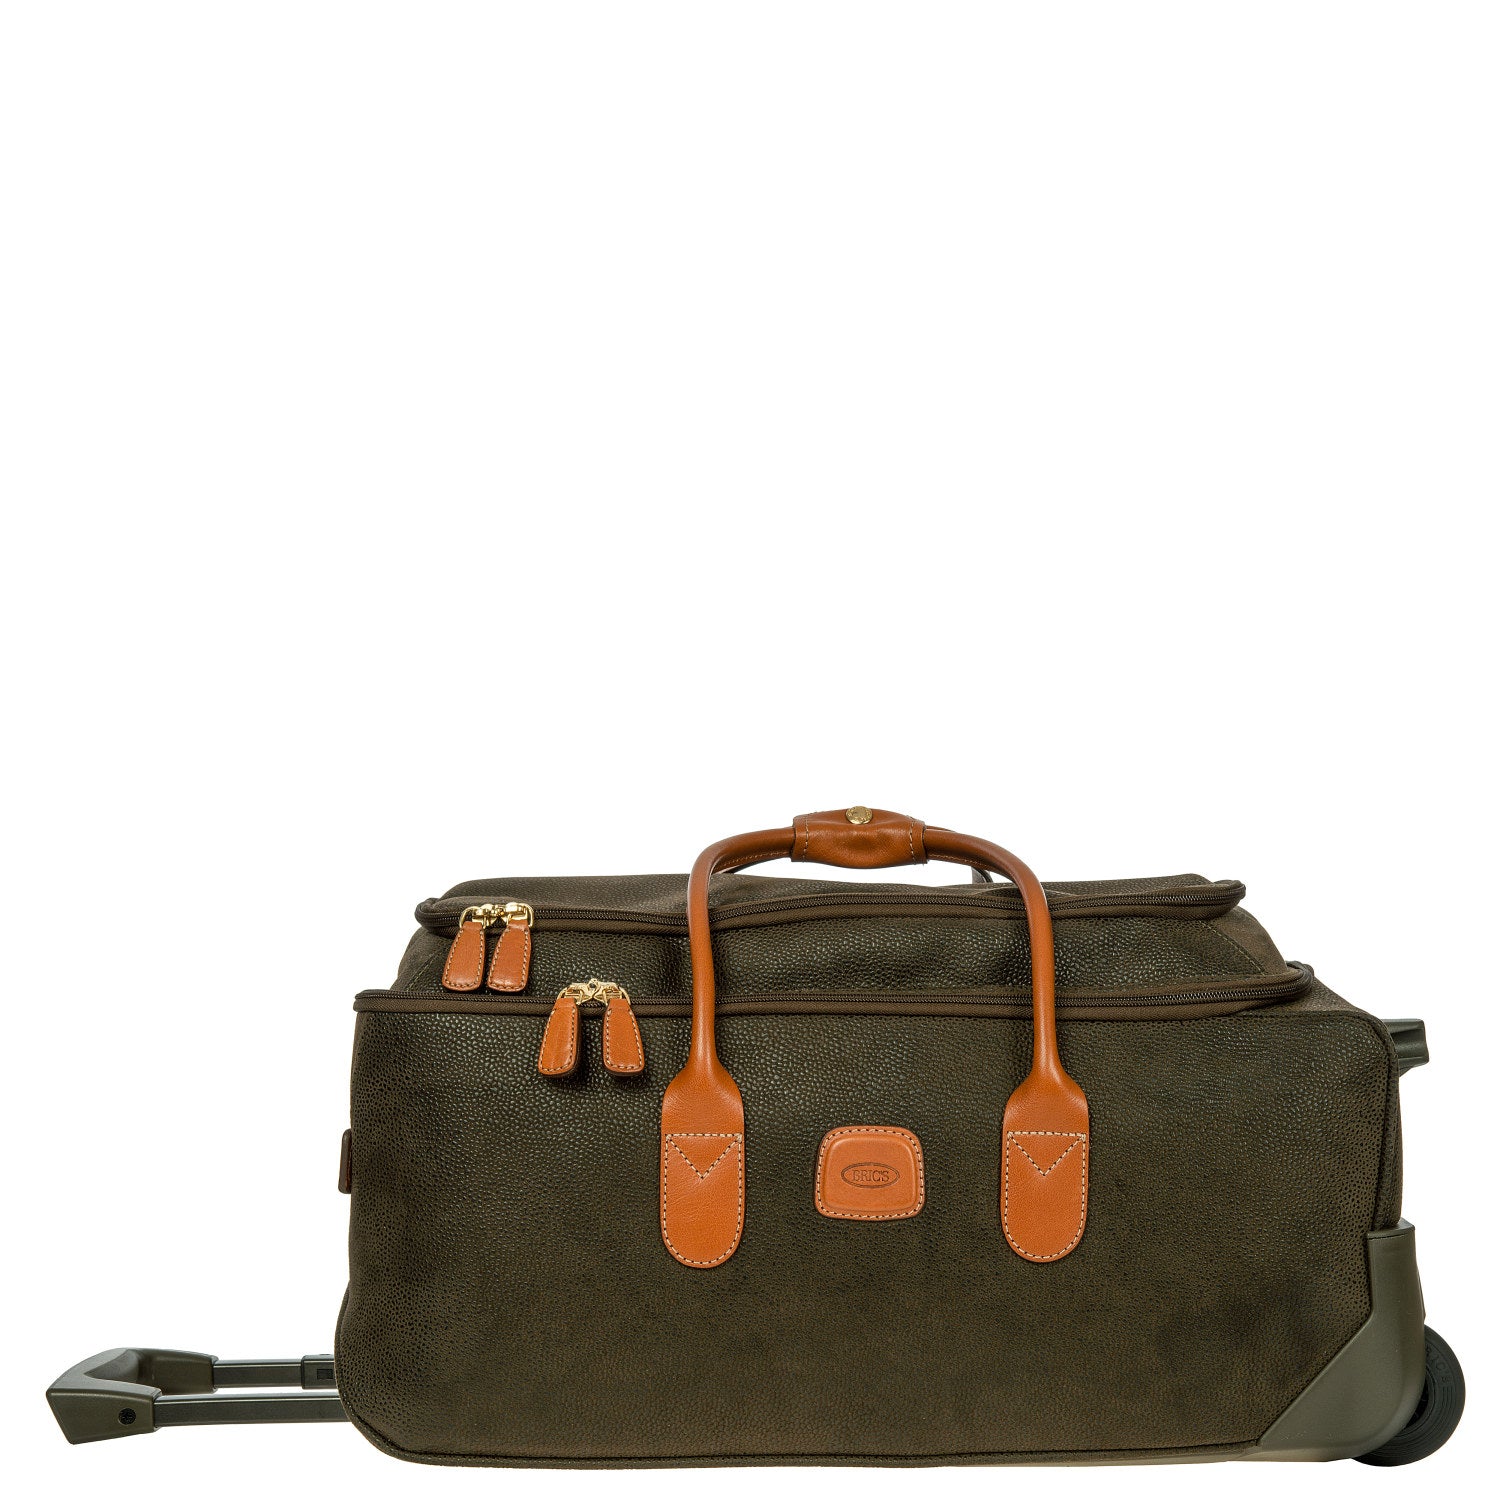 BRIC'S LIFE 21" CARRY-ON ROLLING DUFFLE BAG - OLIVE OR BLACK